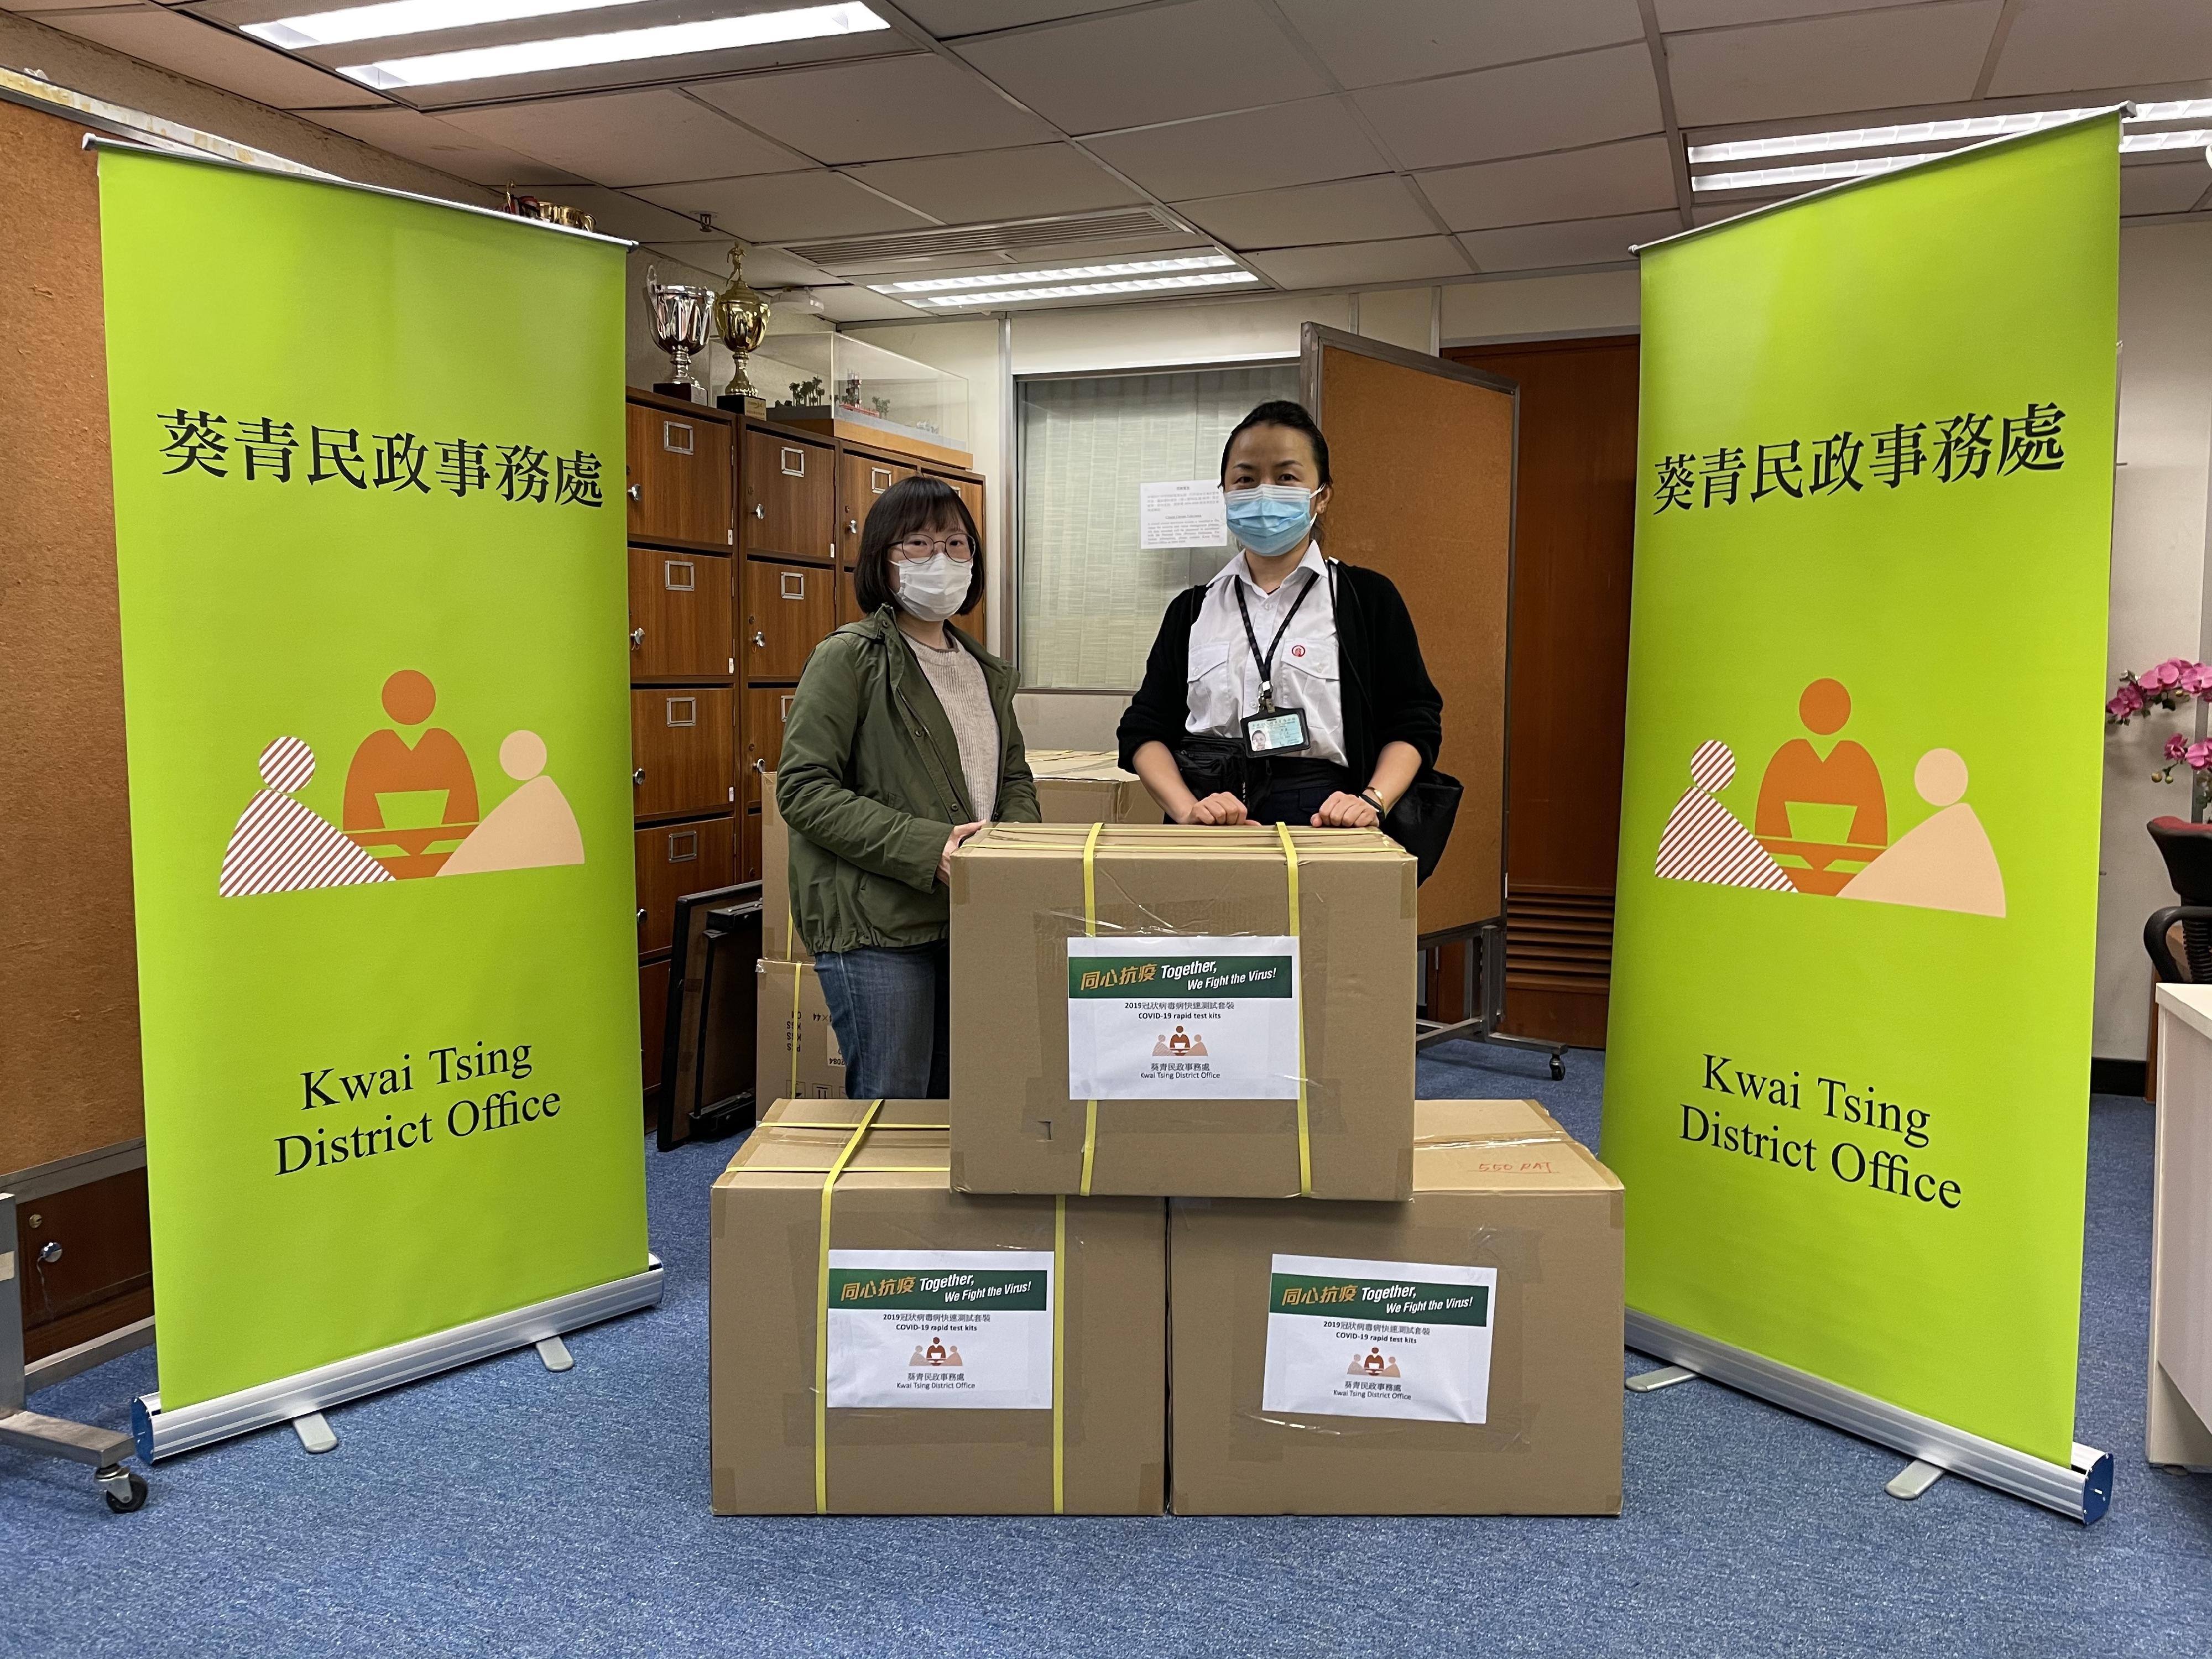 The Kwai Tsing District Office today (March 24) distributed COVID-19 rapid test kits to households, cleansing workers and property management staff living and working in Kwai Tsui Estate for voluntary testing through the property management company.